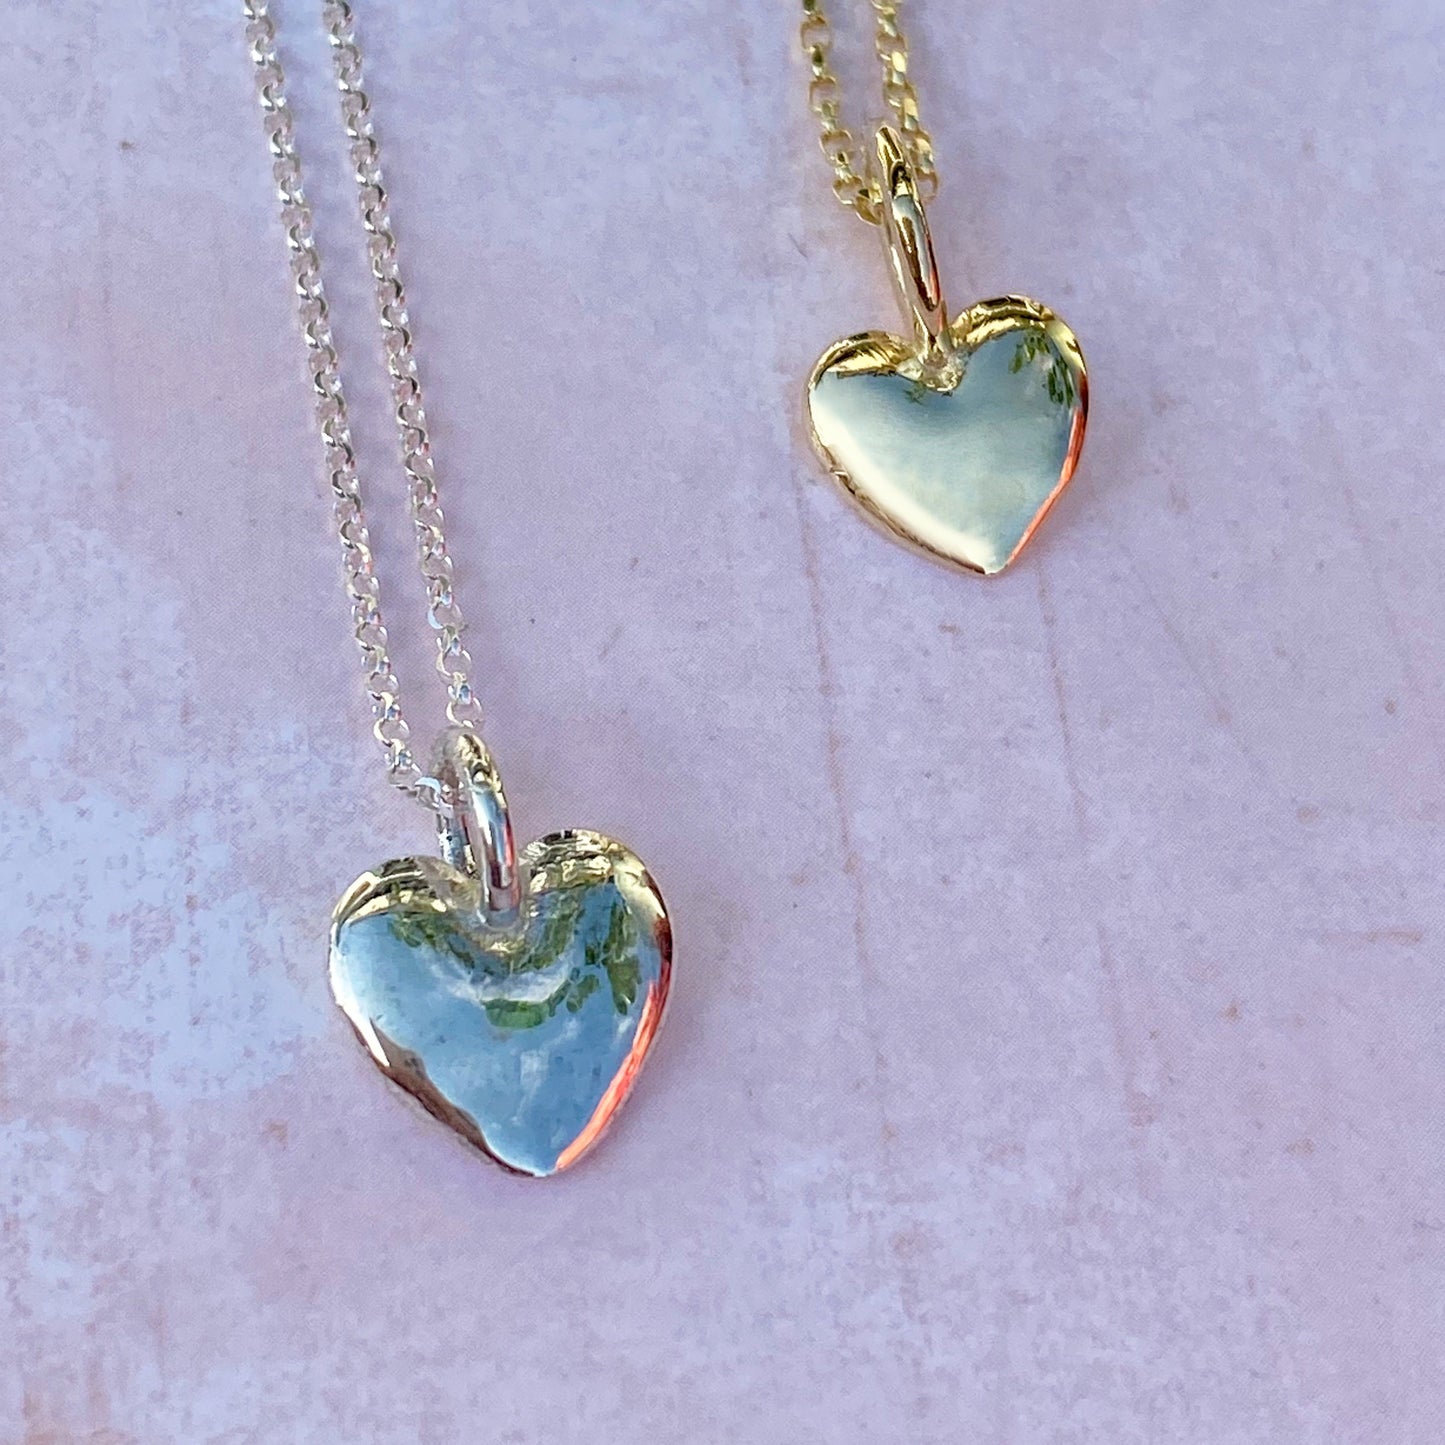 Solid silver or gold heart necklace